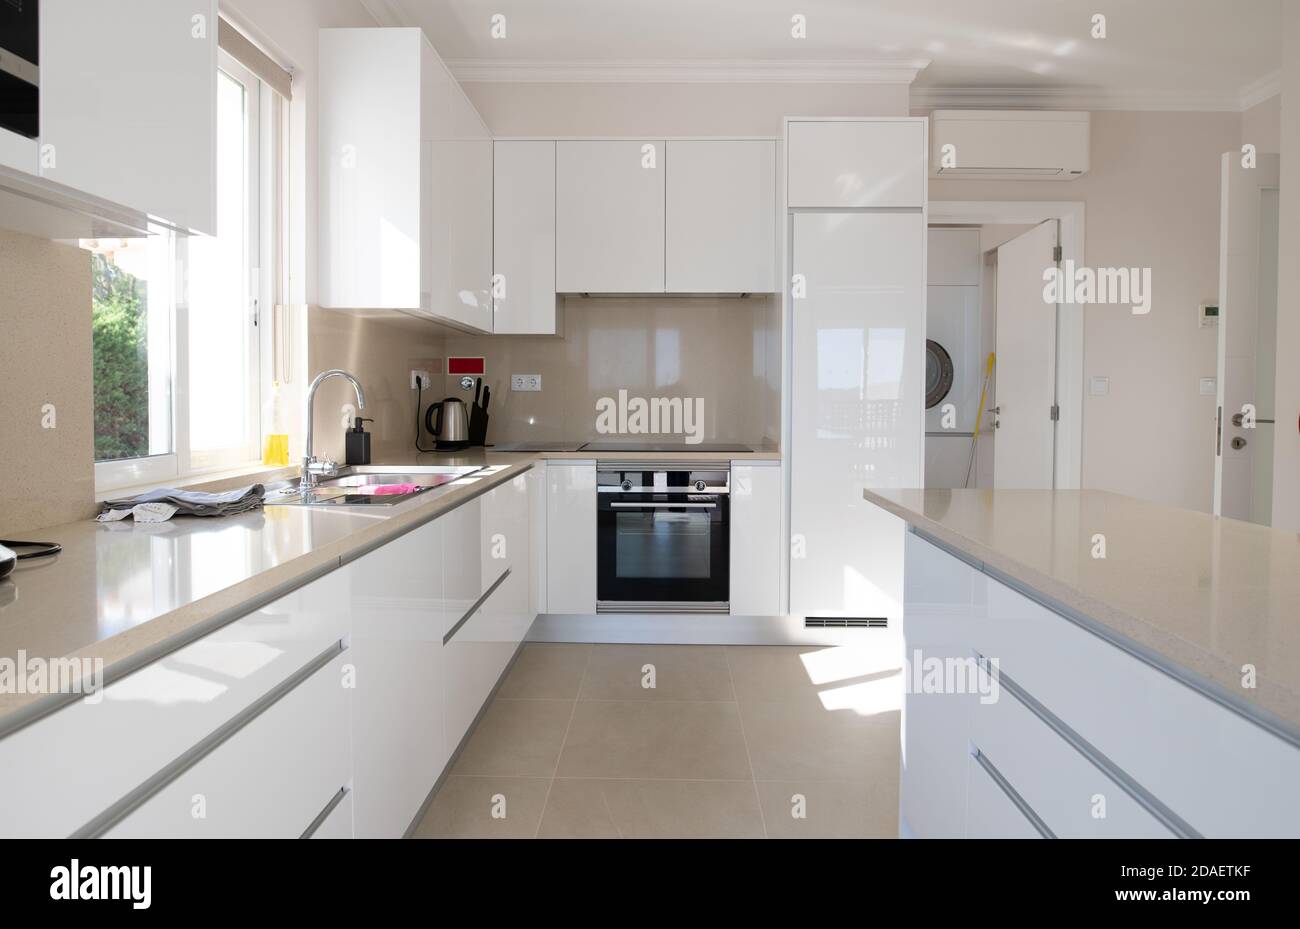 Brand new modern kitchen with white cabinets and beige stone counter top and ceramic tiled floor Stock Photo